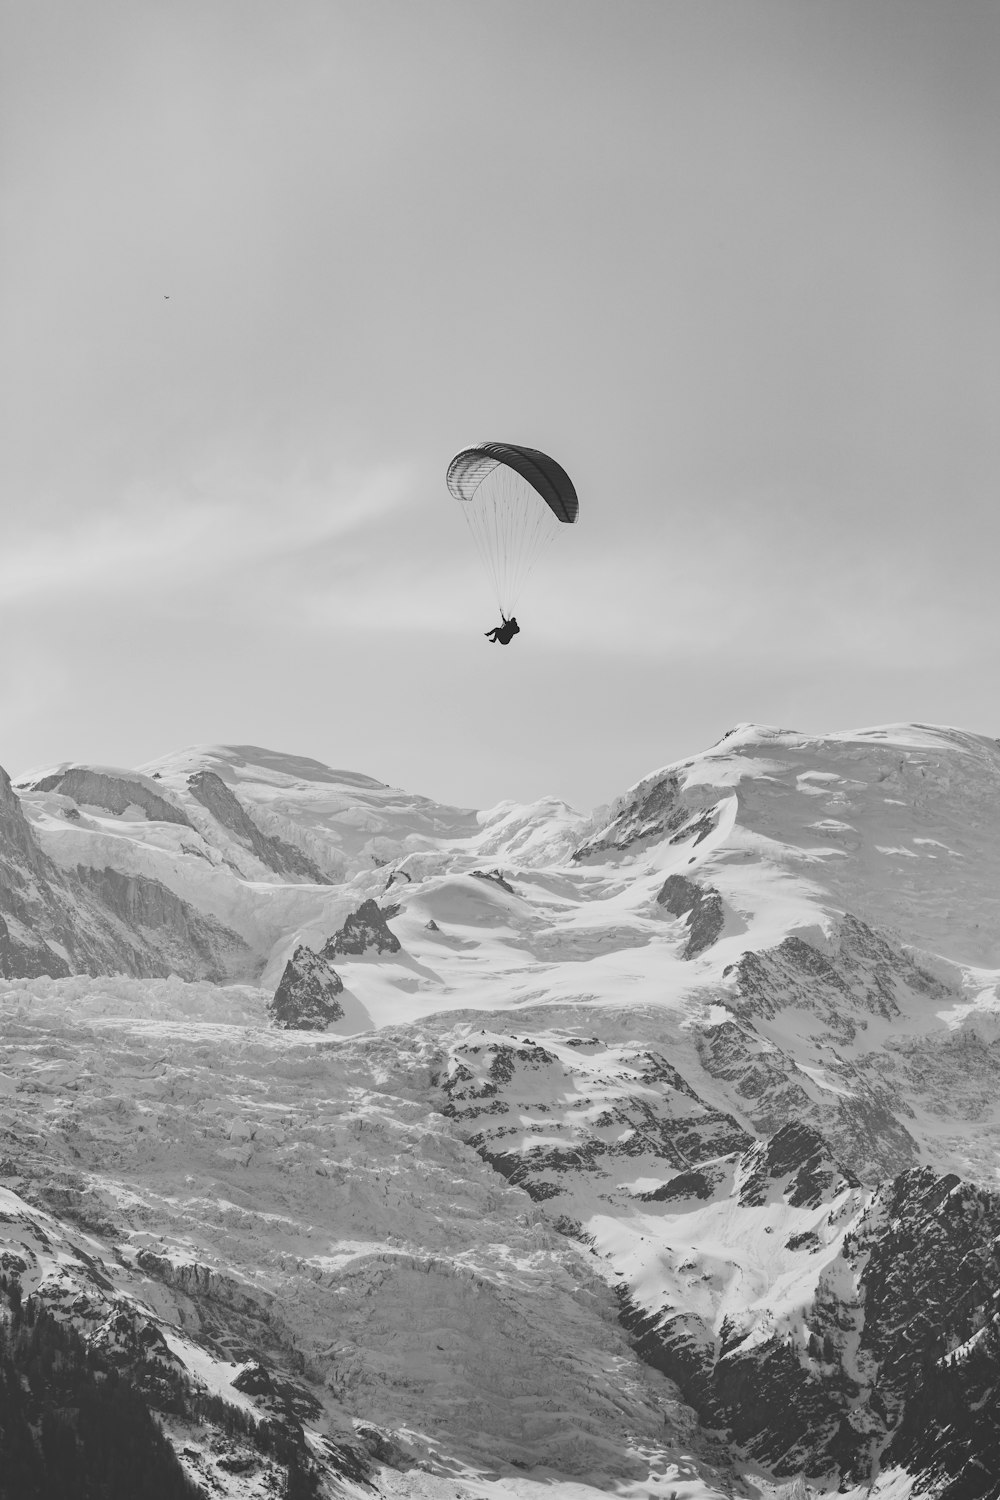 a paraglider is flying over a snowy mountain range